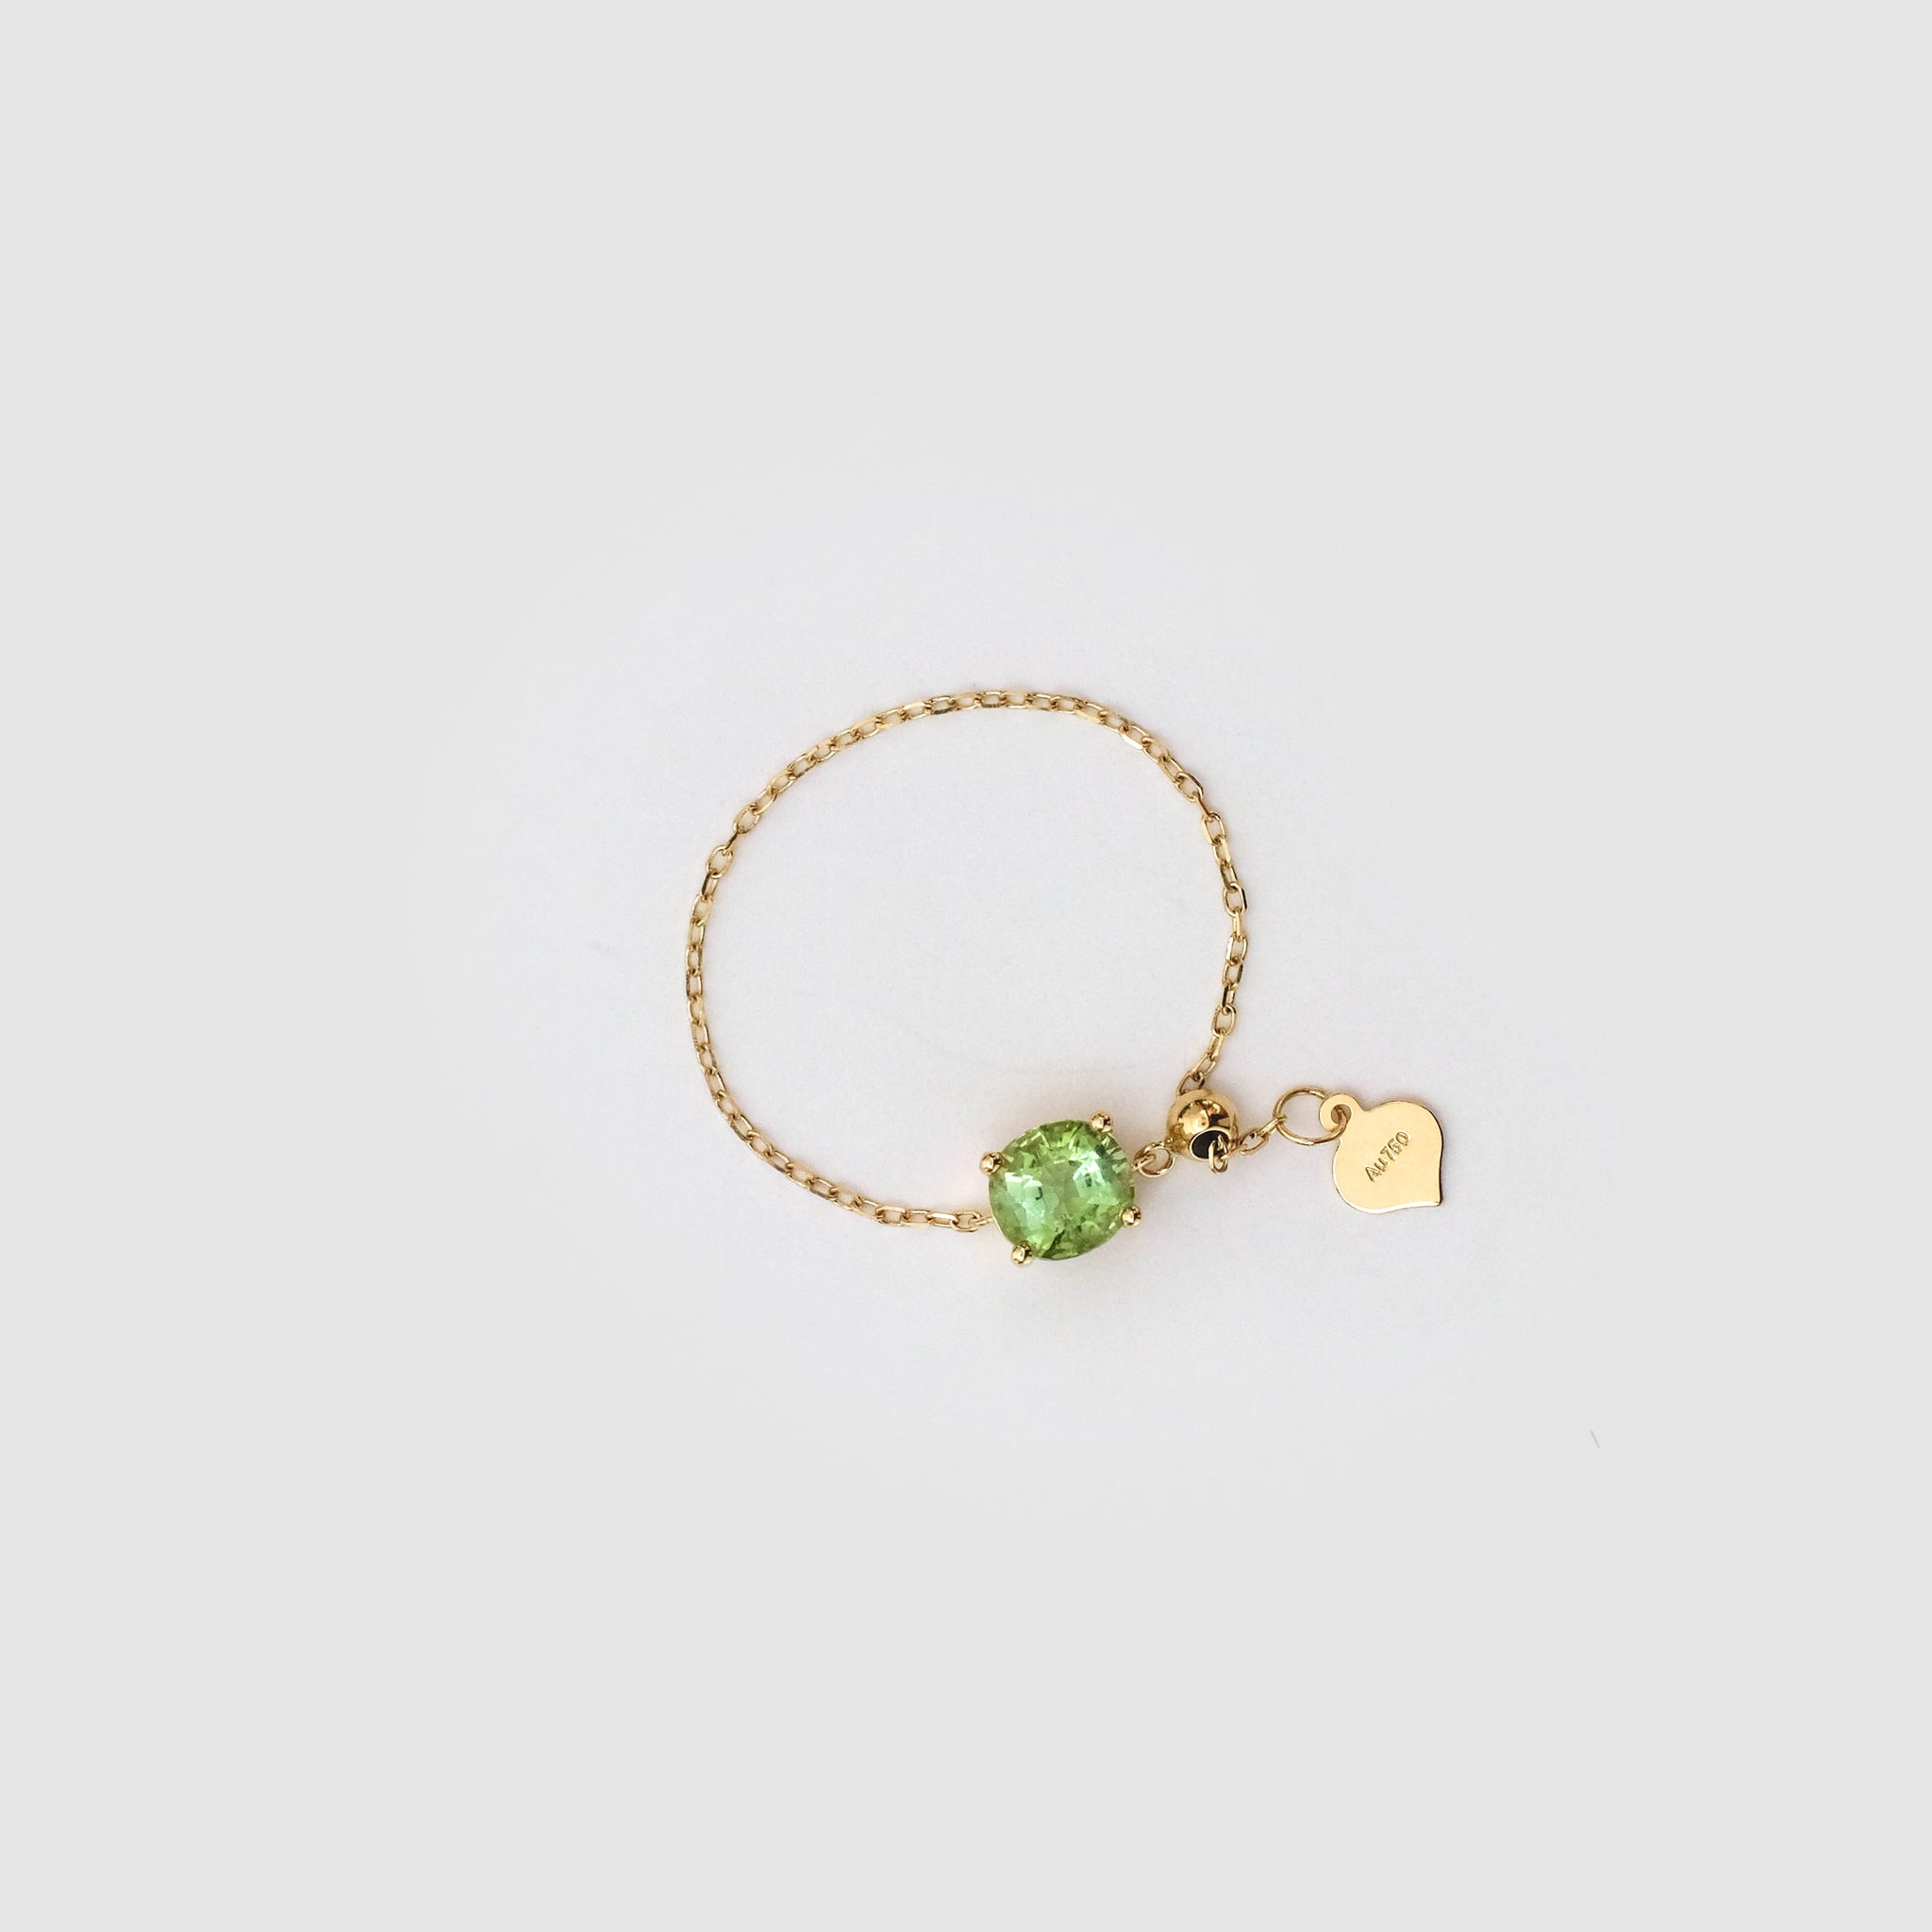 Green Tourmaline Adjustable Ring Chain, 18k solid gold